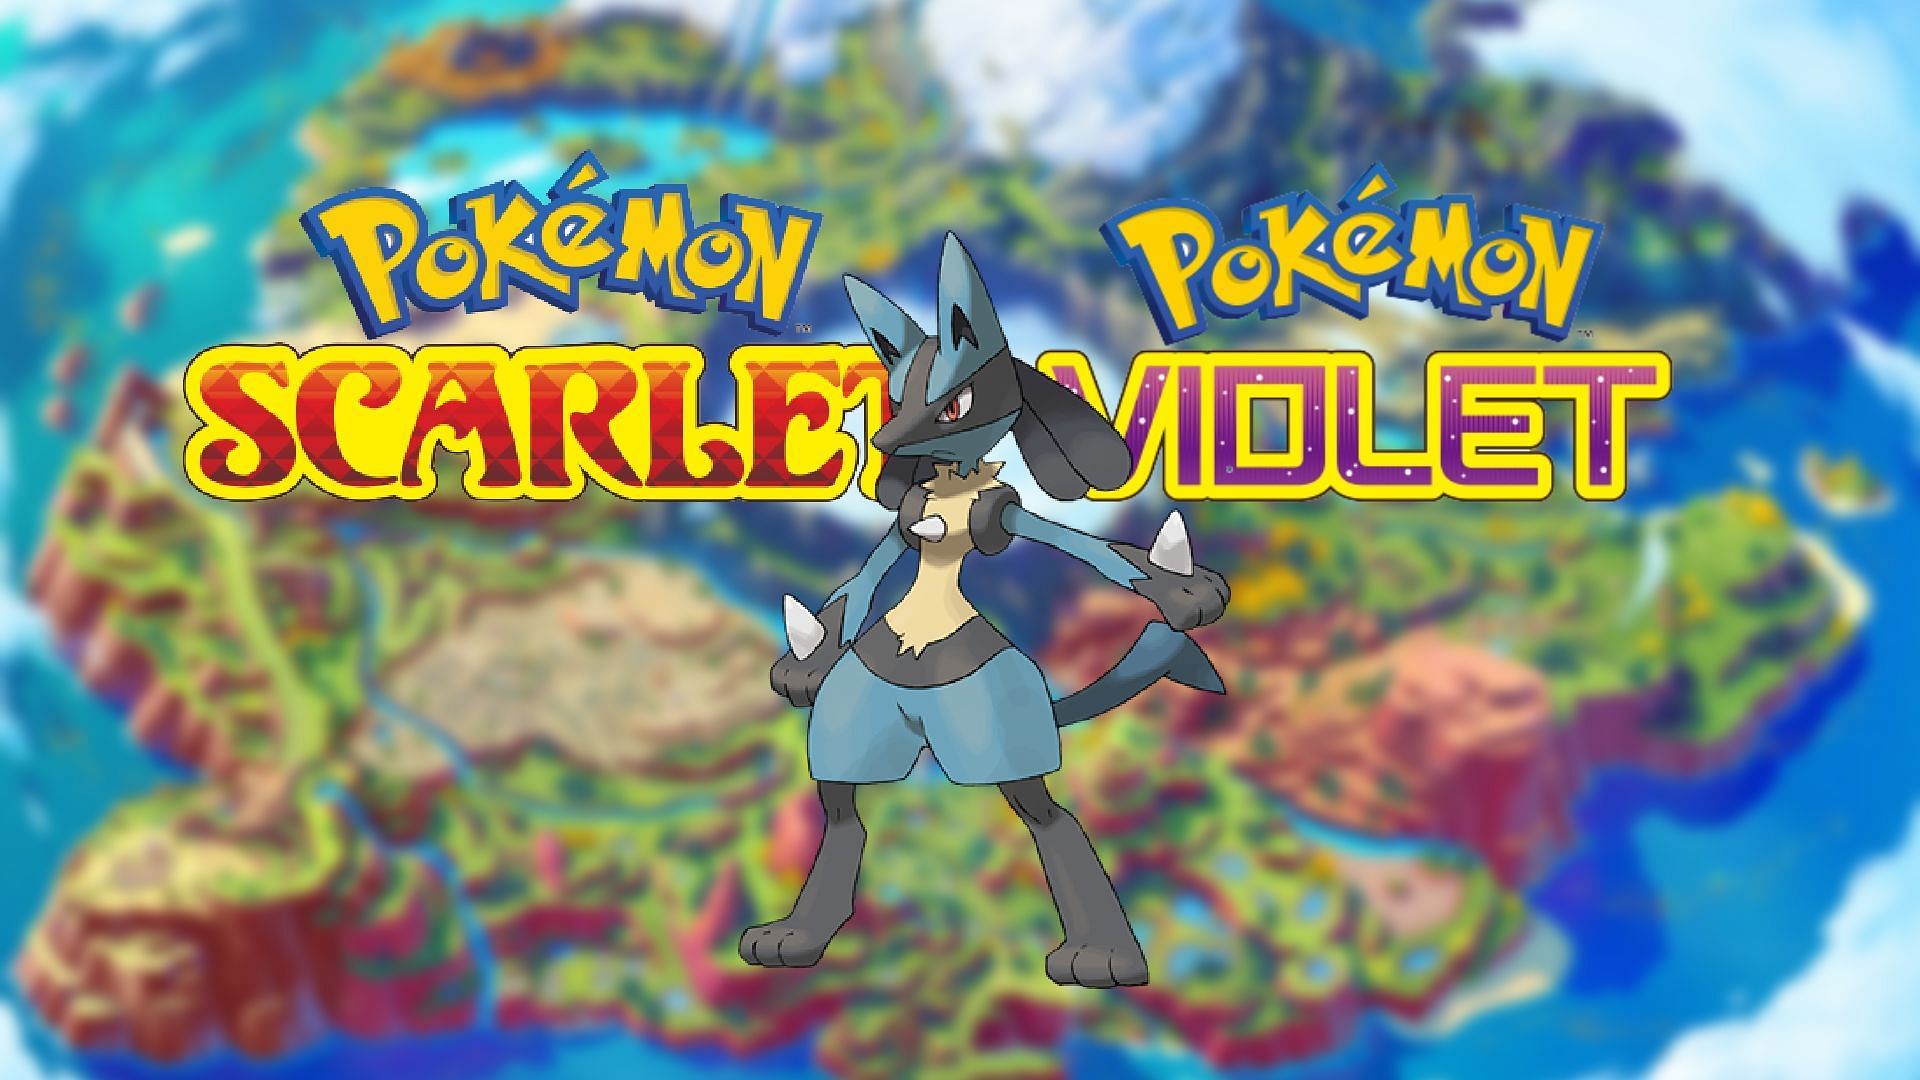 Getting Riolu and Lucarion (Image via Pokemon Scarlet and Violet)